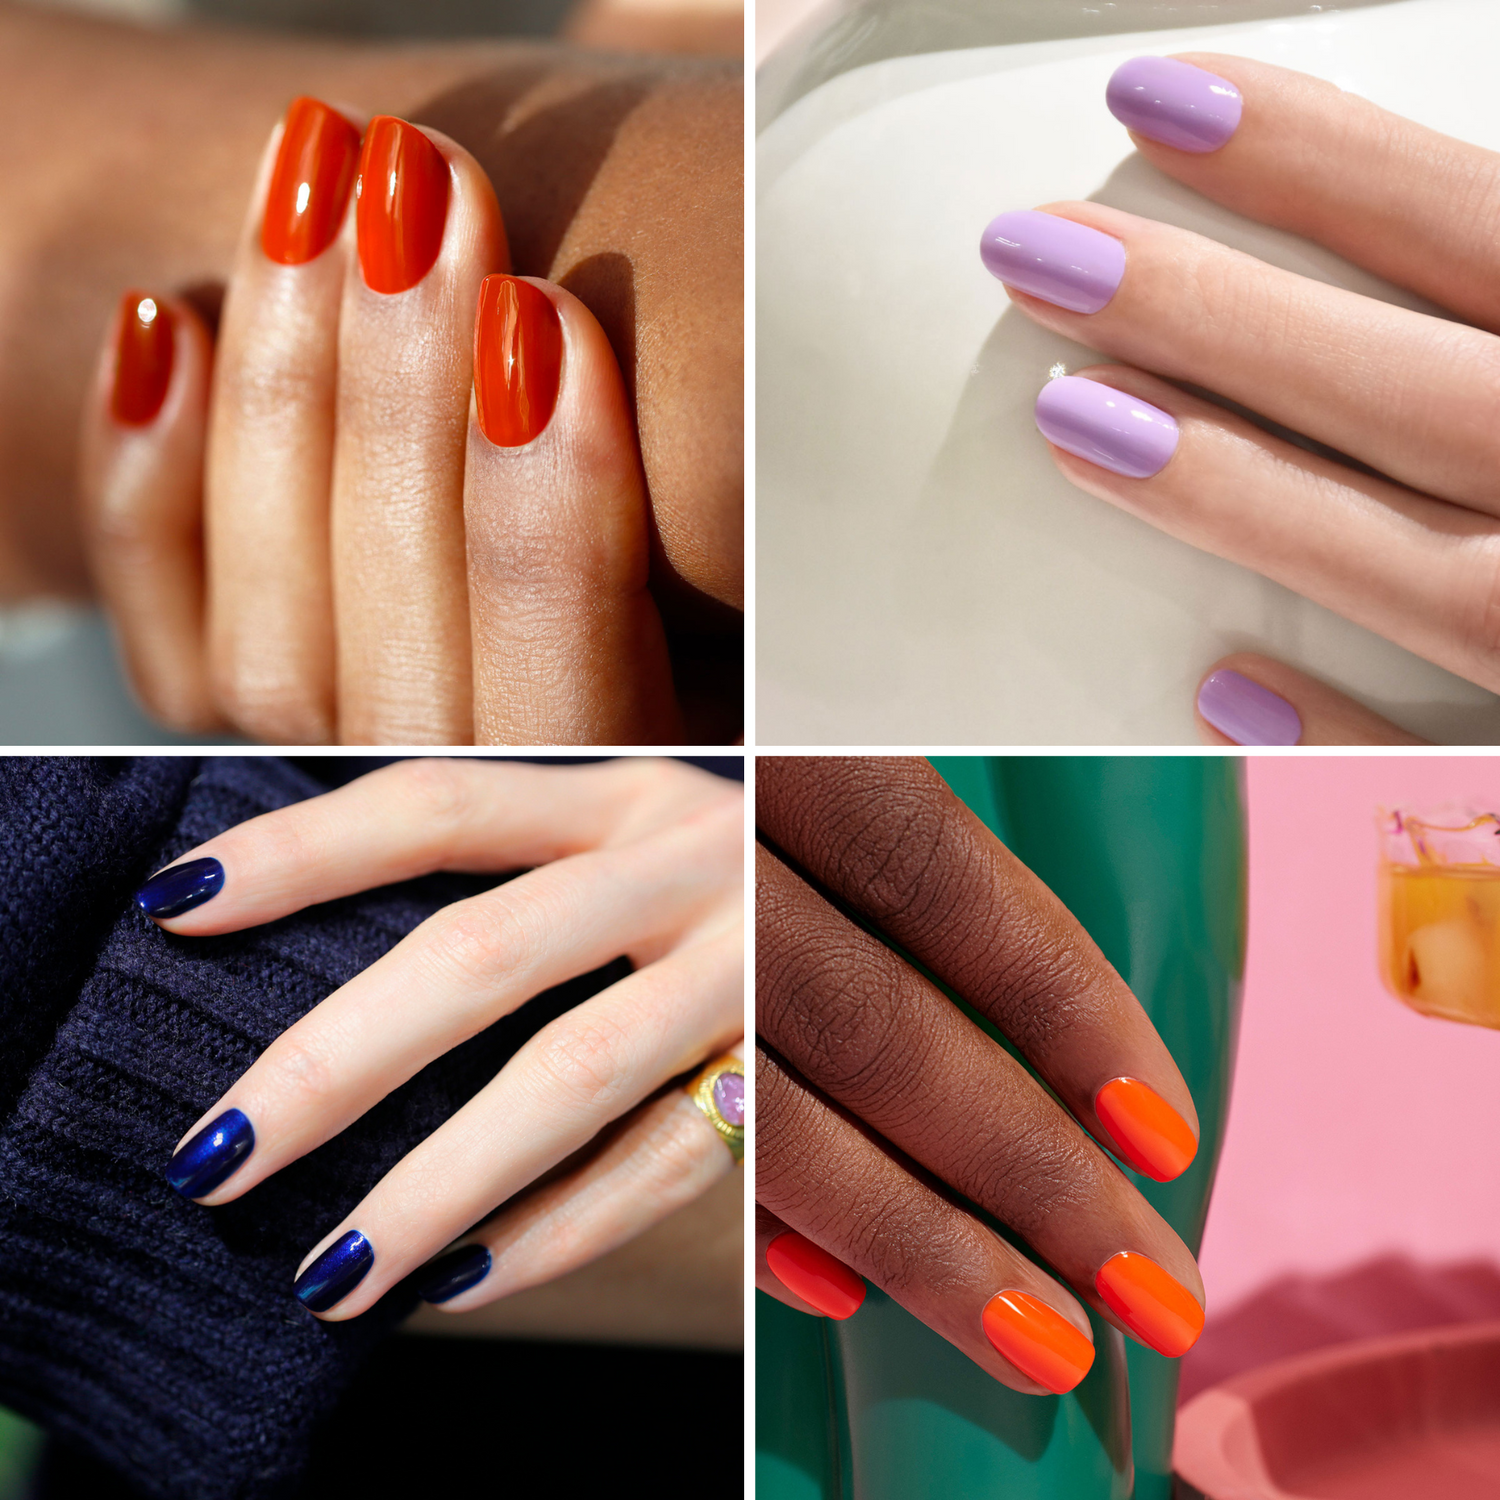 Choose Your Next Nail Color With Color Theory